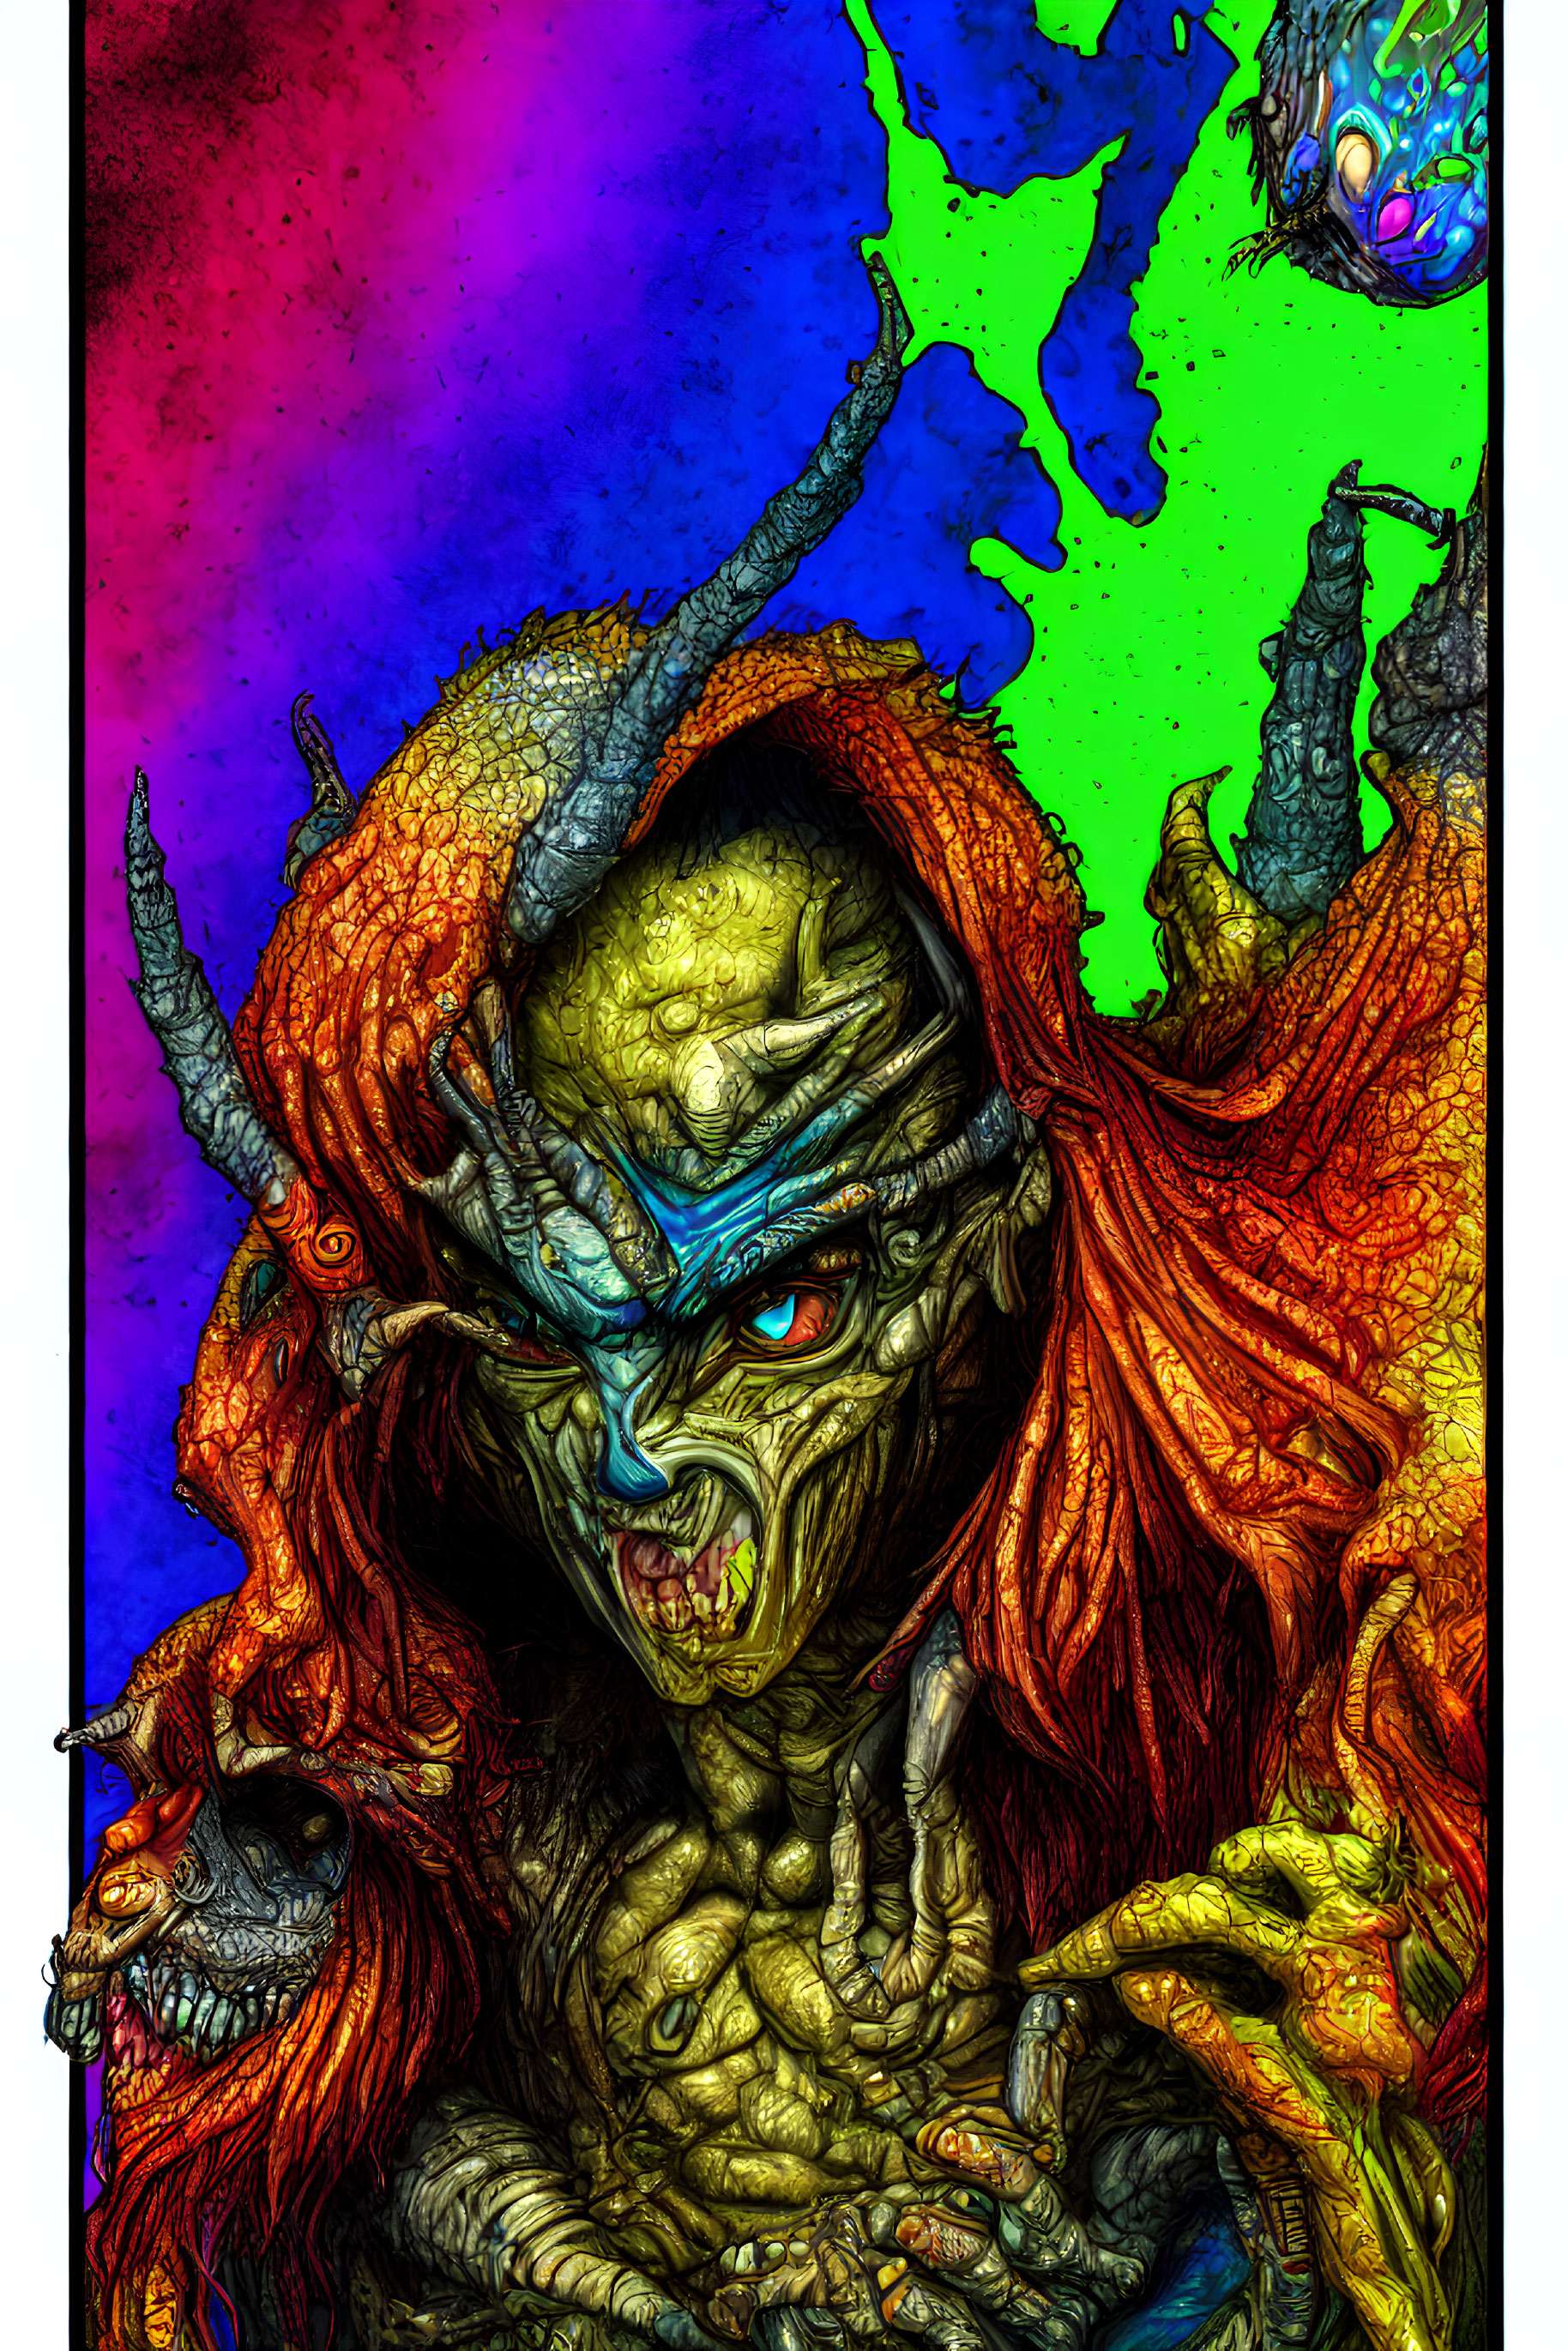 Menacing creature with horns and fiery hair on vibrant background